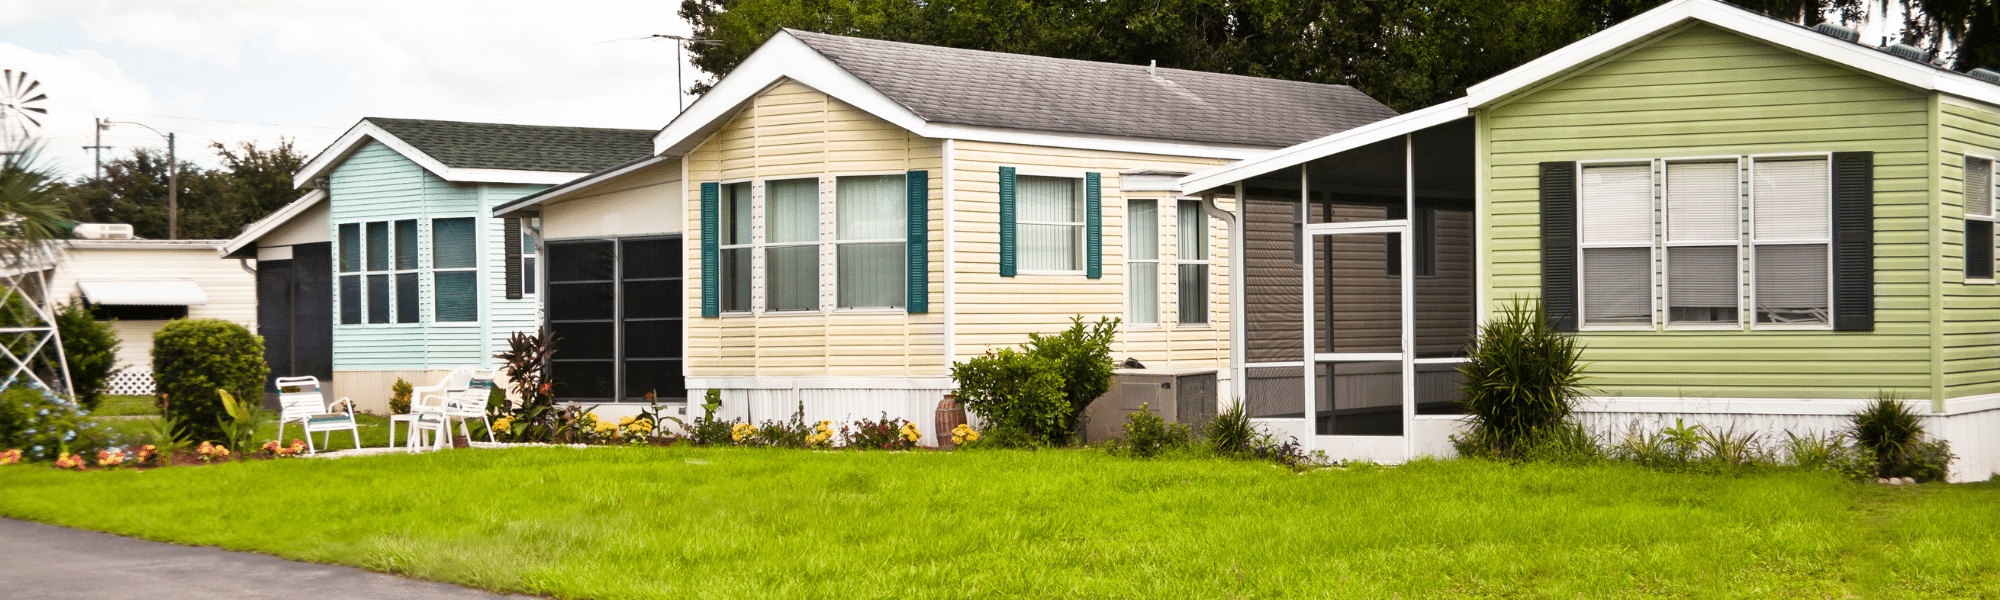 Buying a manufactured home